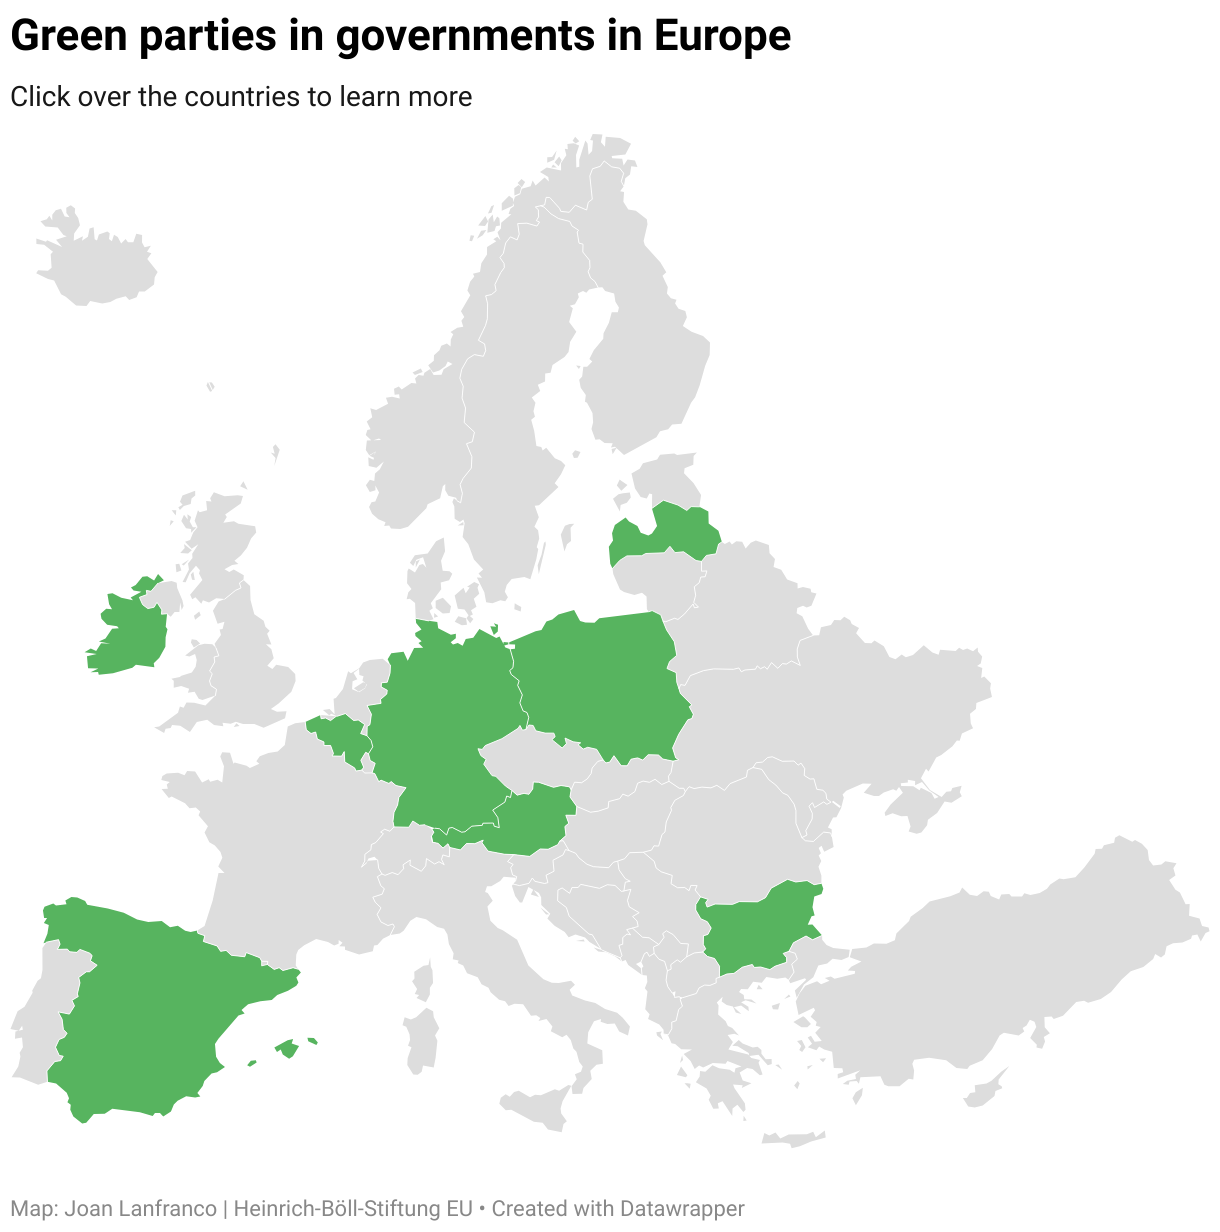 Green parties in governments in Europe